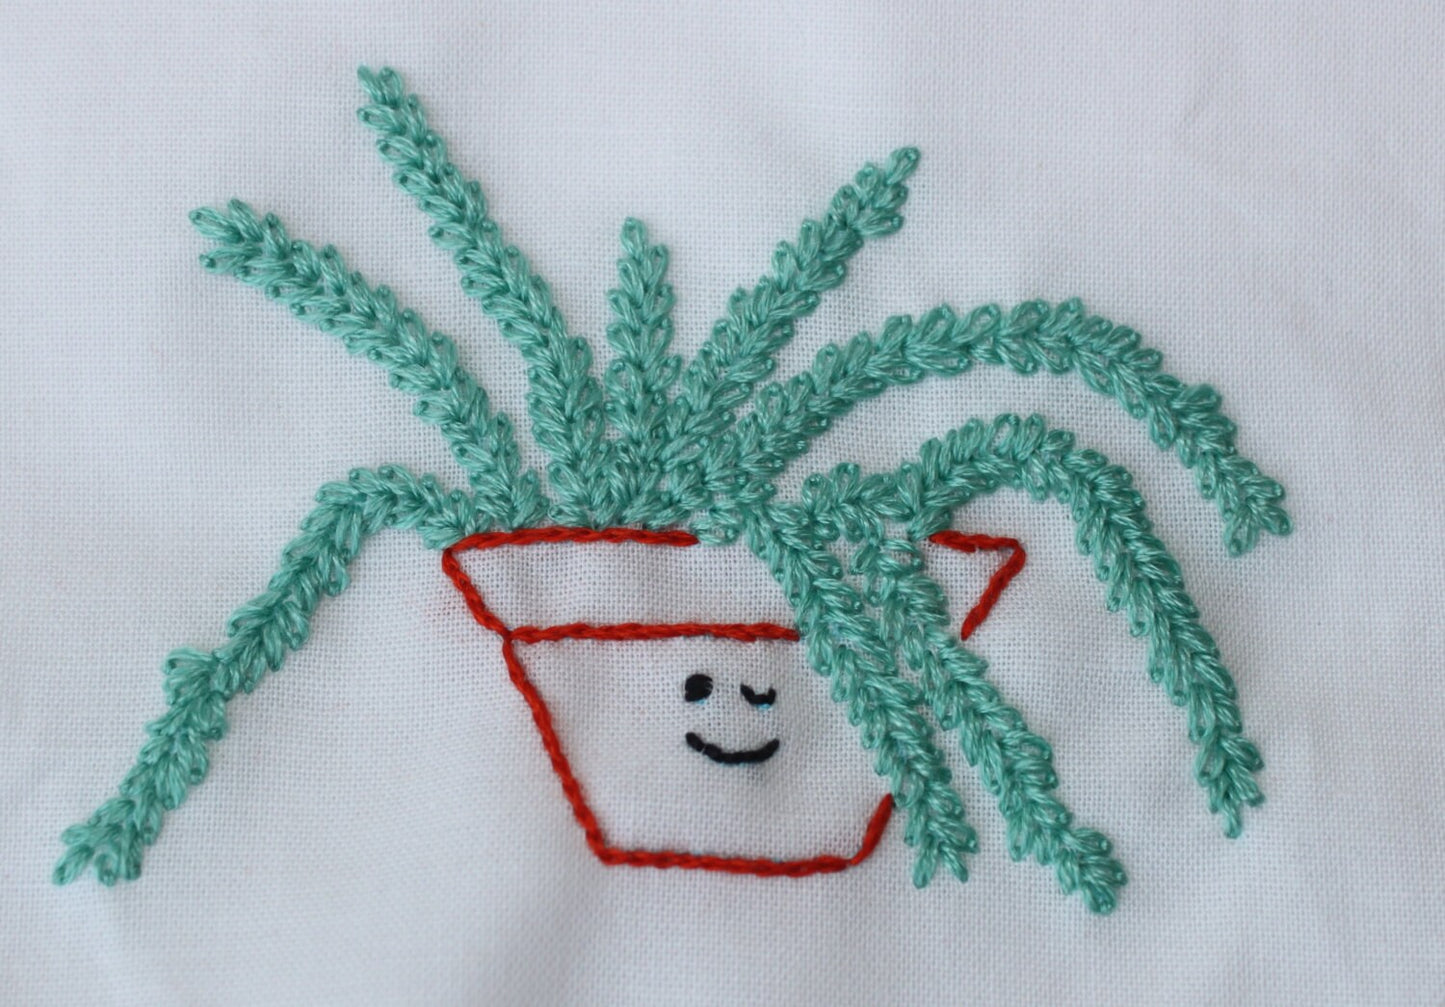 Plant embroidery pattern, Succulent Plant Embroidery Pattern, Christmas Cactus, Burro's Tail and Aloe Vera Plant, Cactus Plant Embroidery